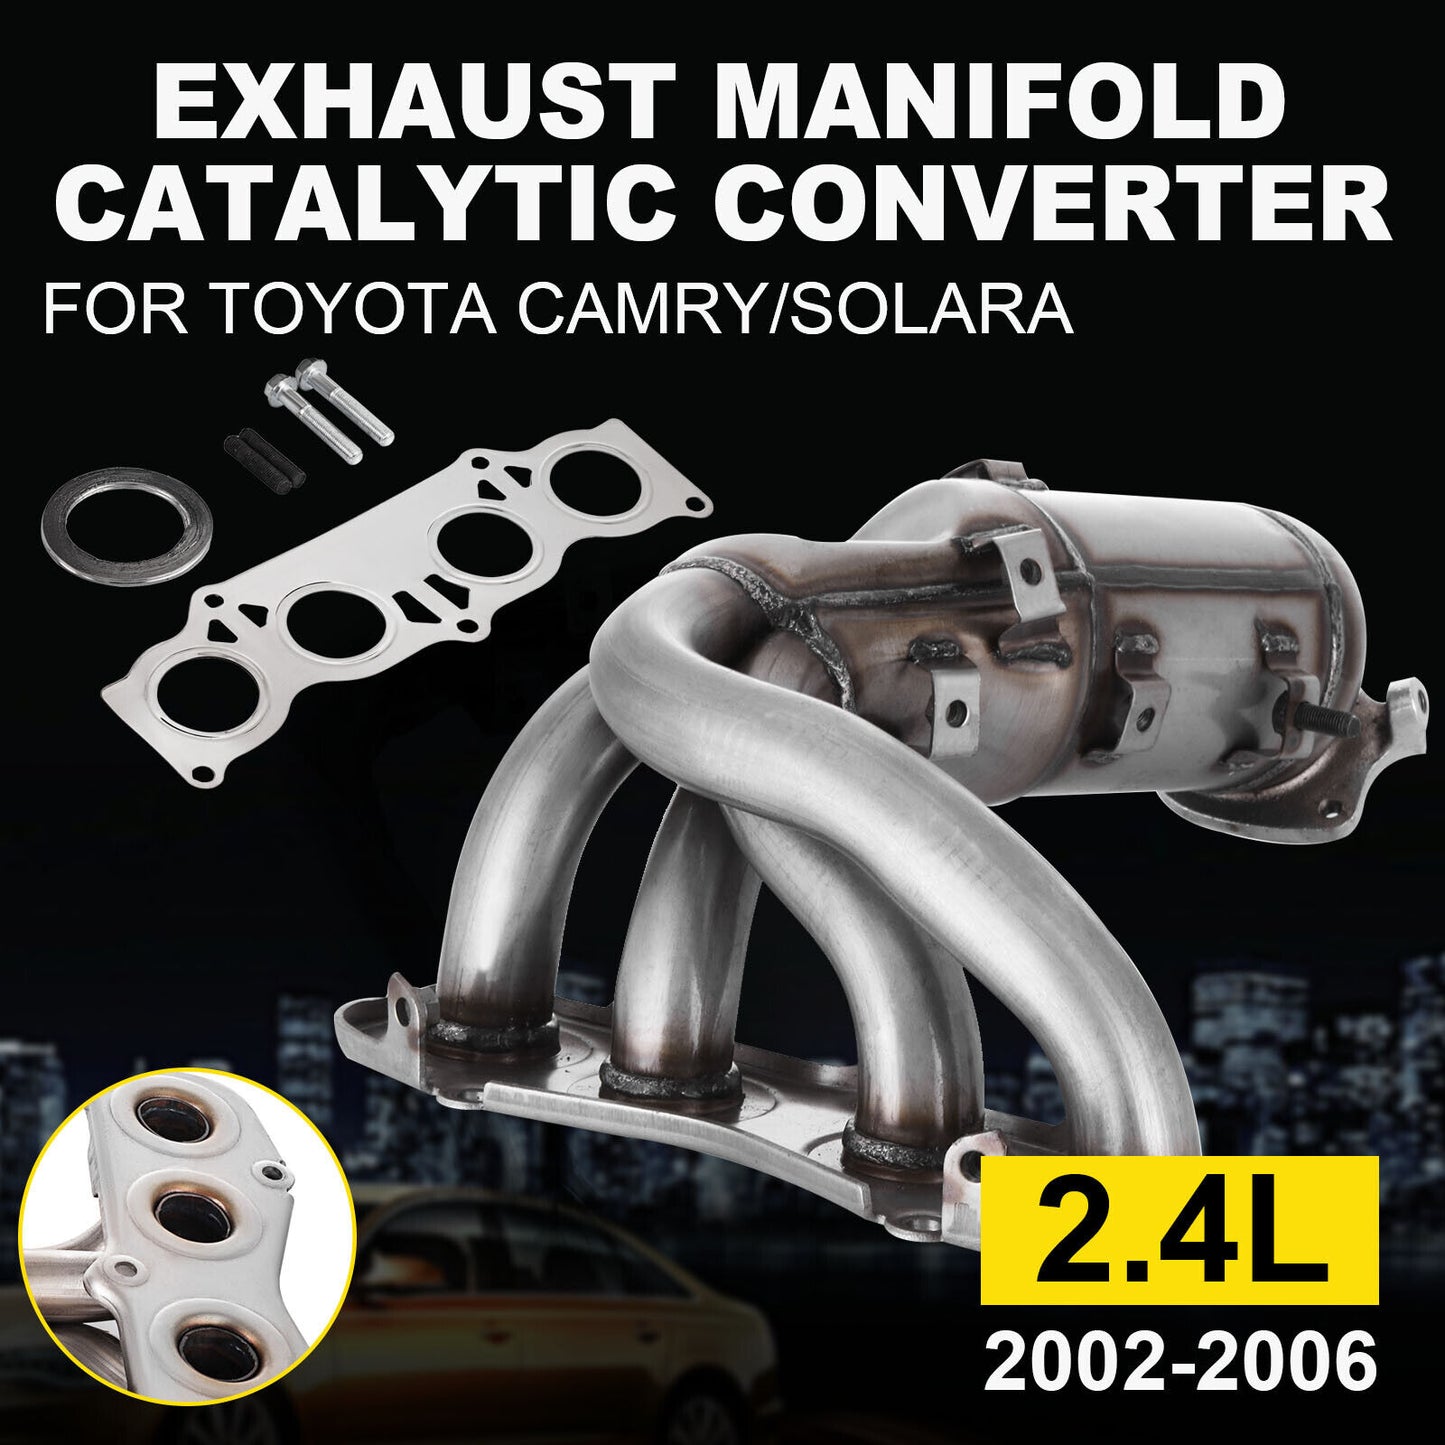 Catalytic Converter For Toyota Camry 2.4L Exhaust Manifold Engine 2002-2006